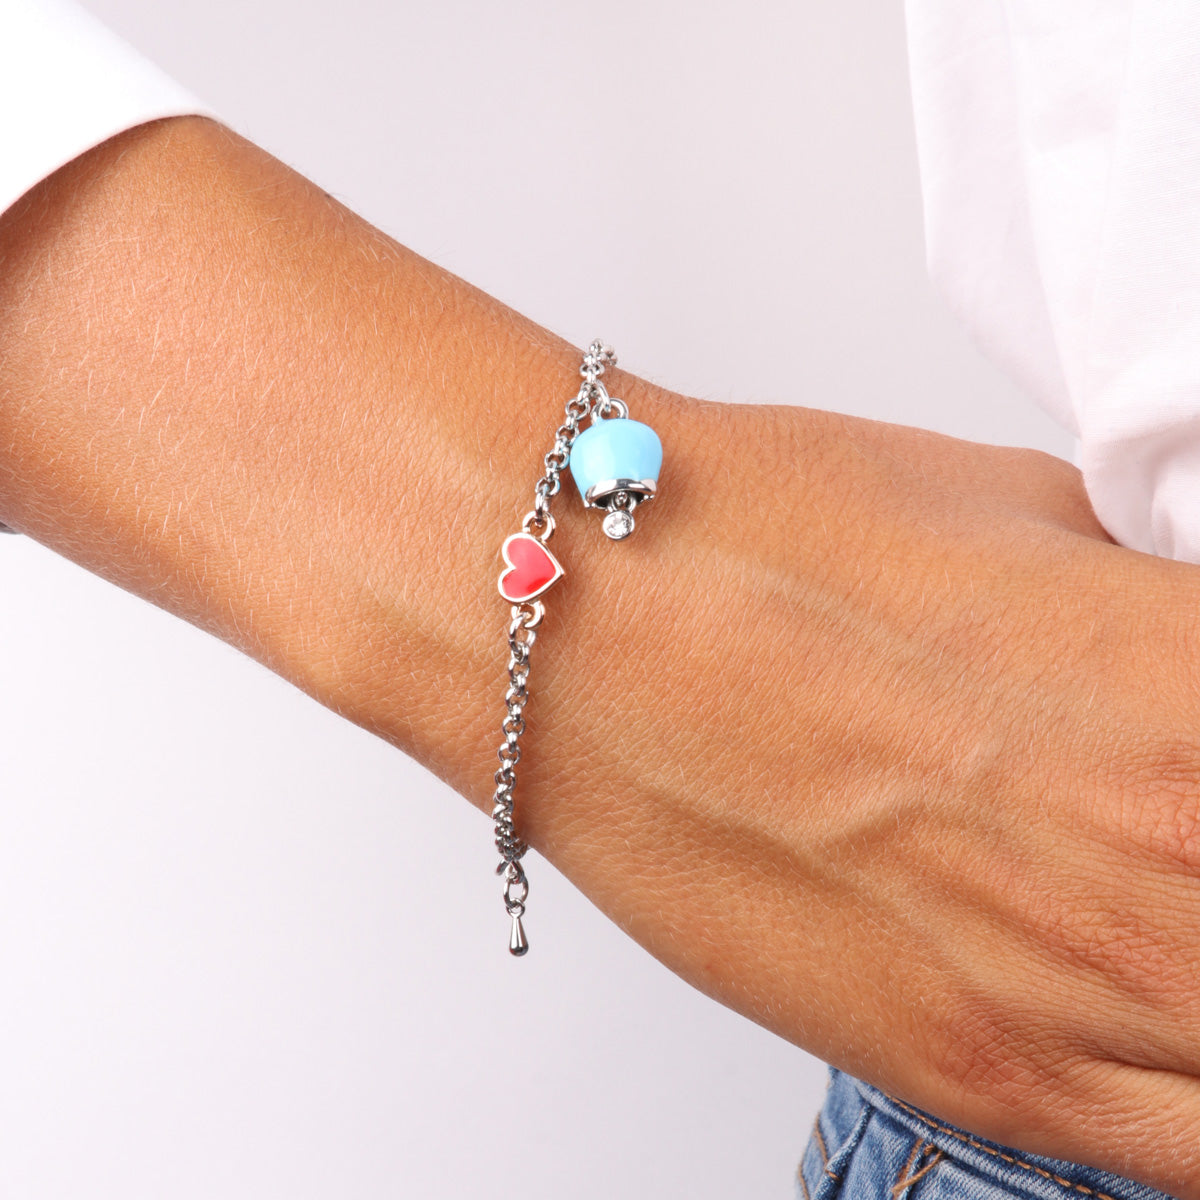 Metal bracelet with bell nogging blue changing and pendant in the shape of a red glazed heart shape and detail